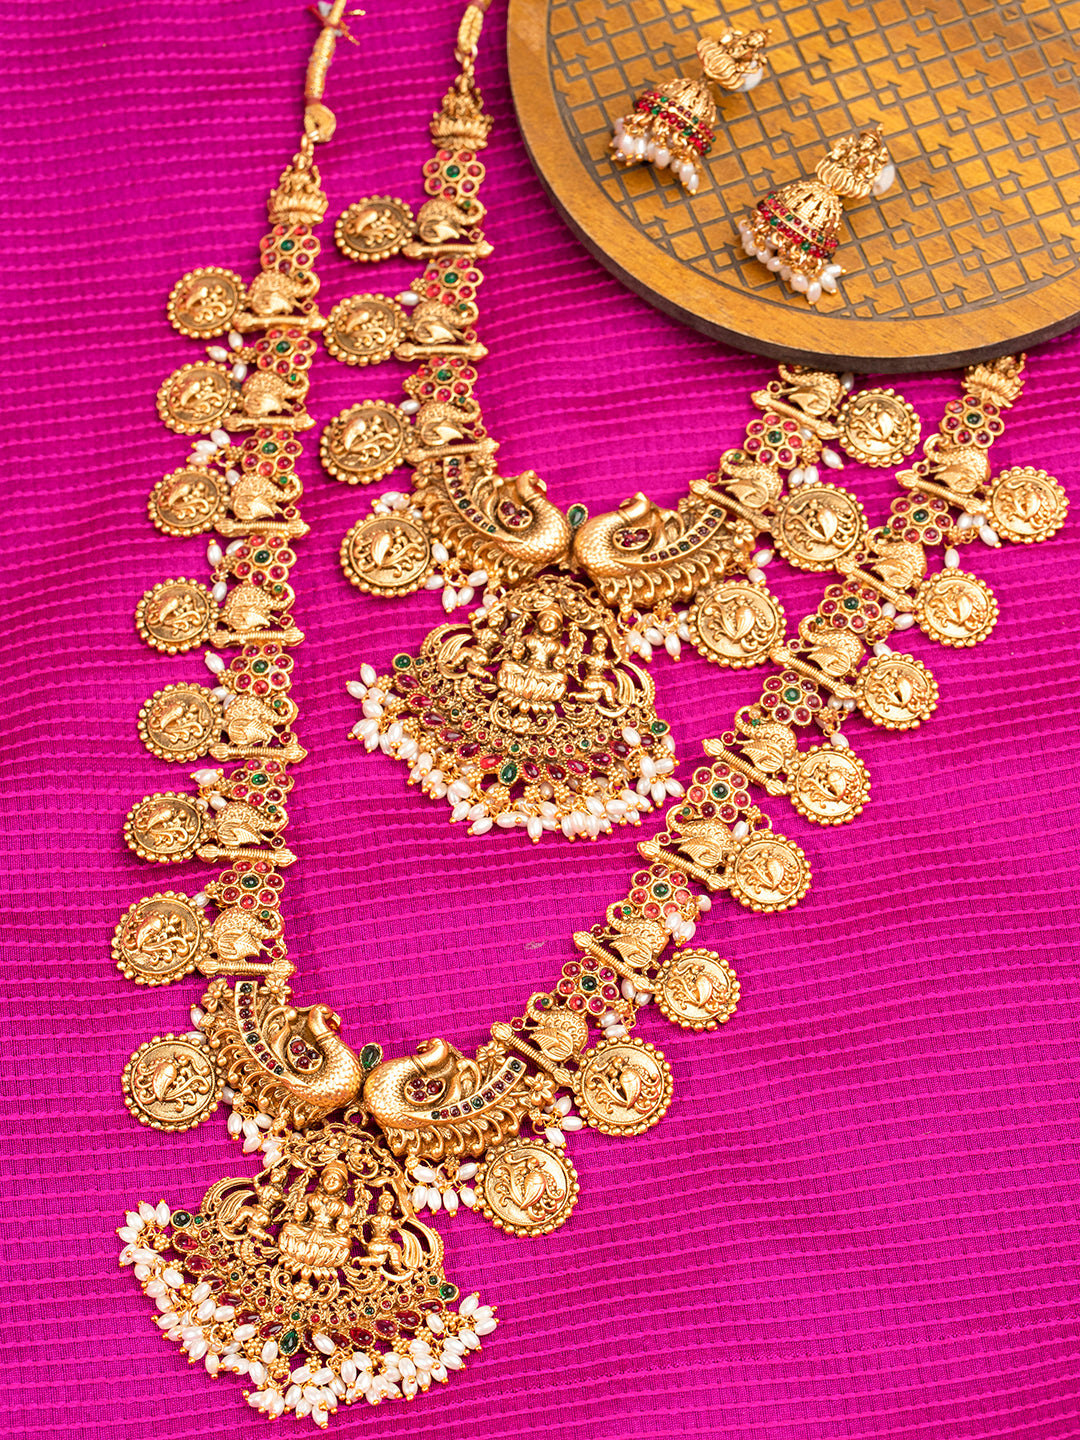 Priyaasi Gold Plated Goddess Laxmi Dual Necklace and Earrings Set